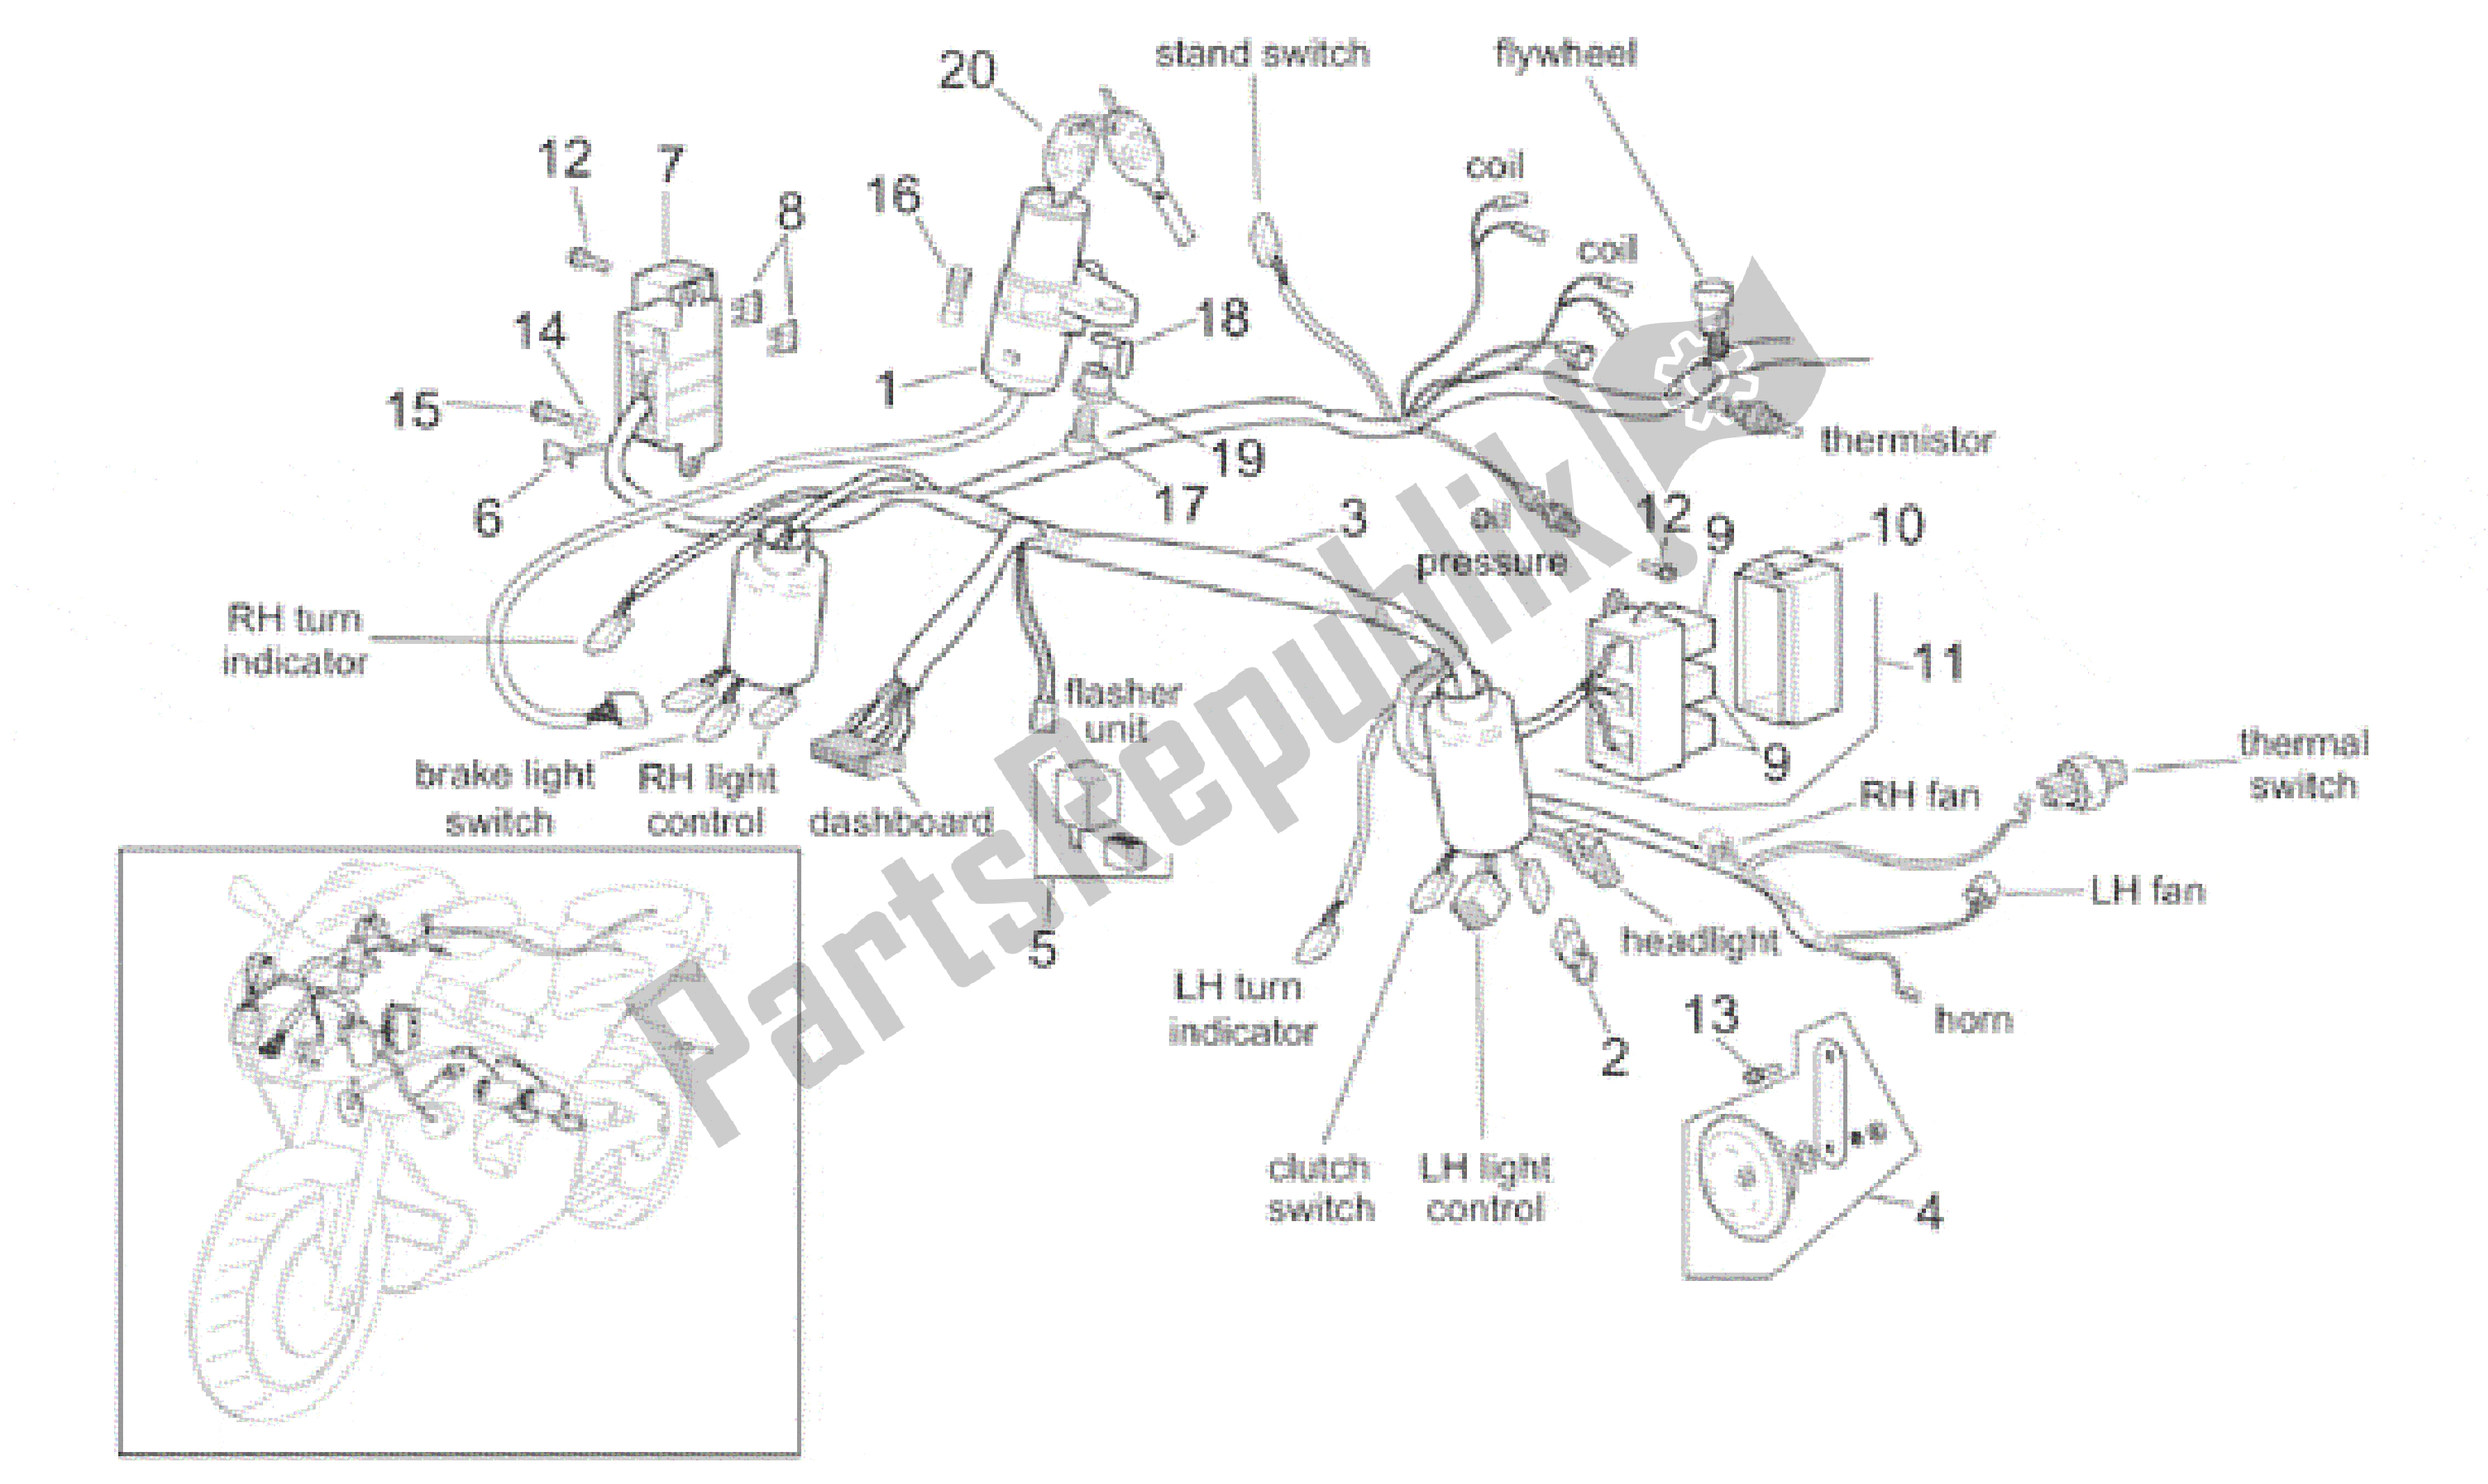 All parts for the Front Electrical System of the Aprilia RSV Mille 390 W 1000 1998 - 1999